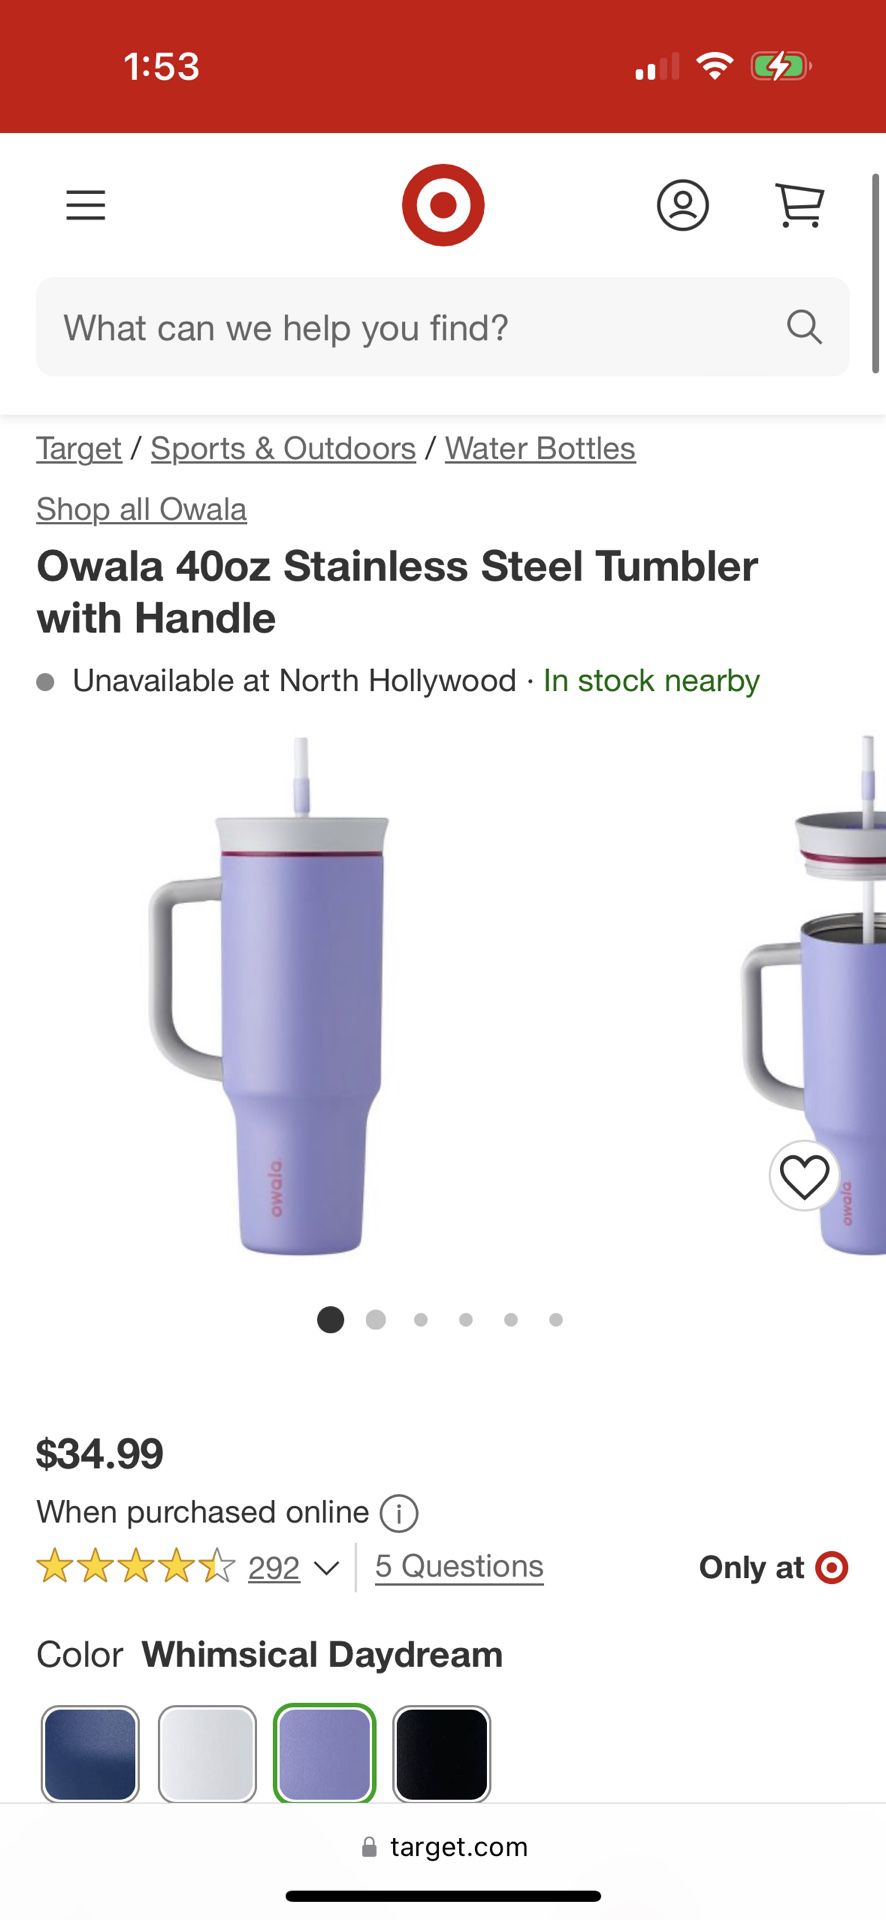 Promotional 40 oz Owala Tumbler - Lost Valley $32.90